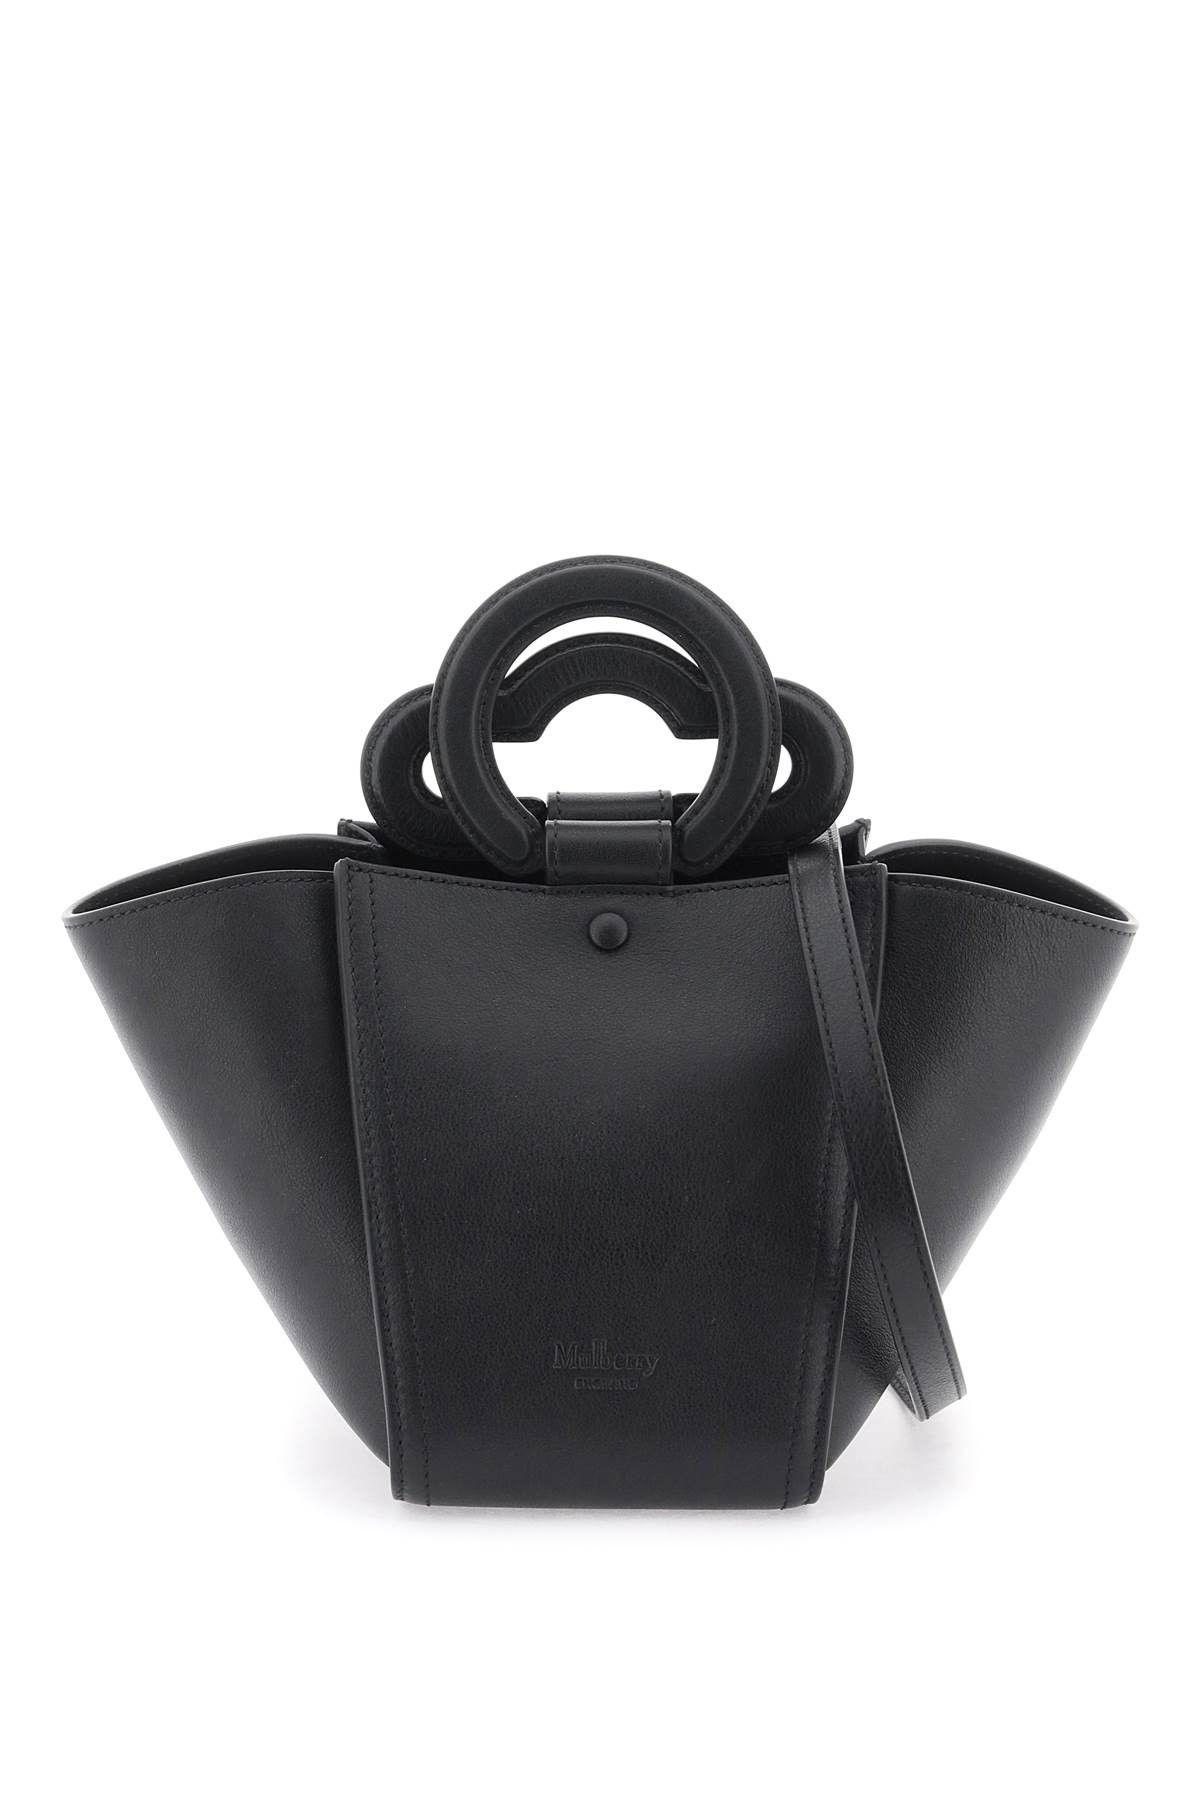 Mulberry Mulberry 'mini rider's top handle' bag | Grailed